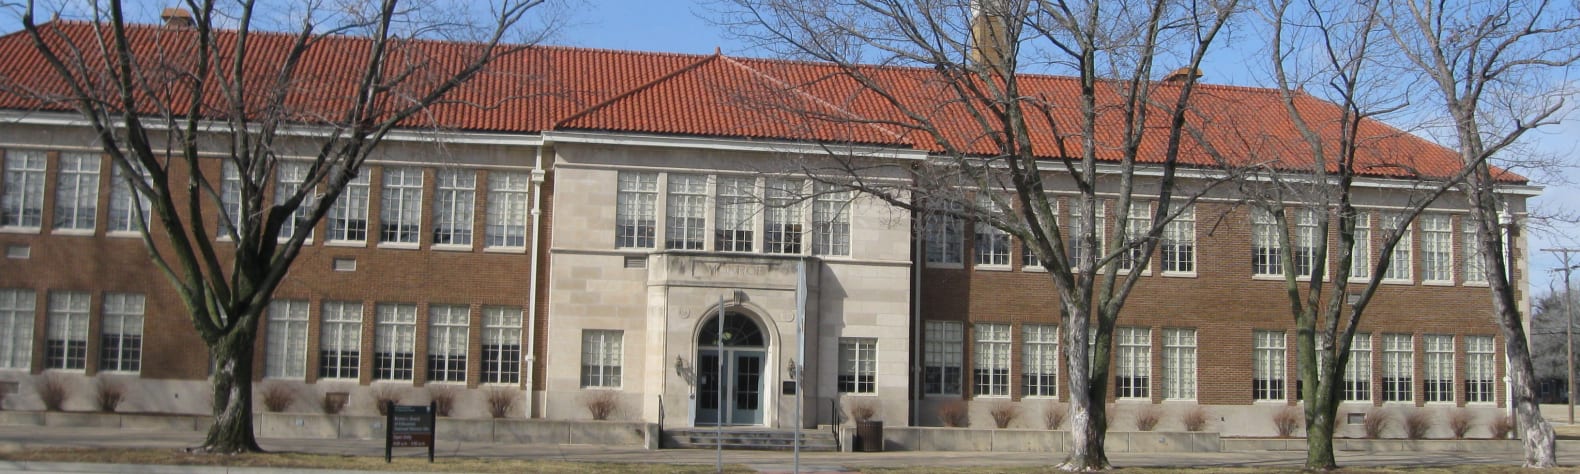 Brown v. Board of Education National Historic Site